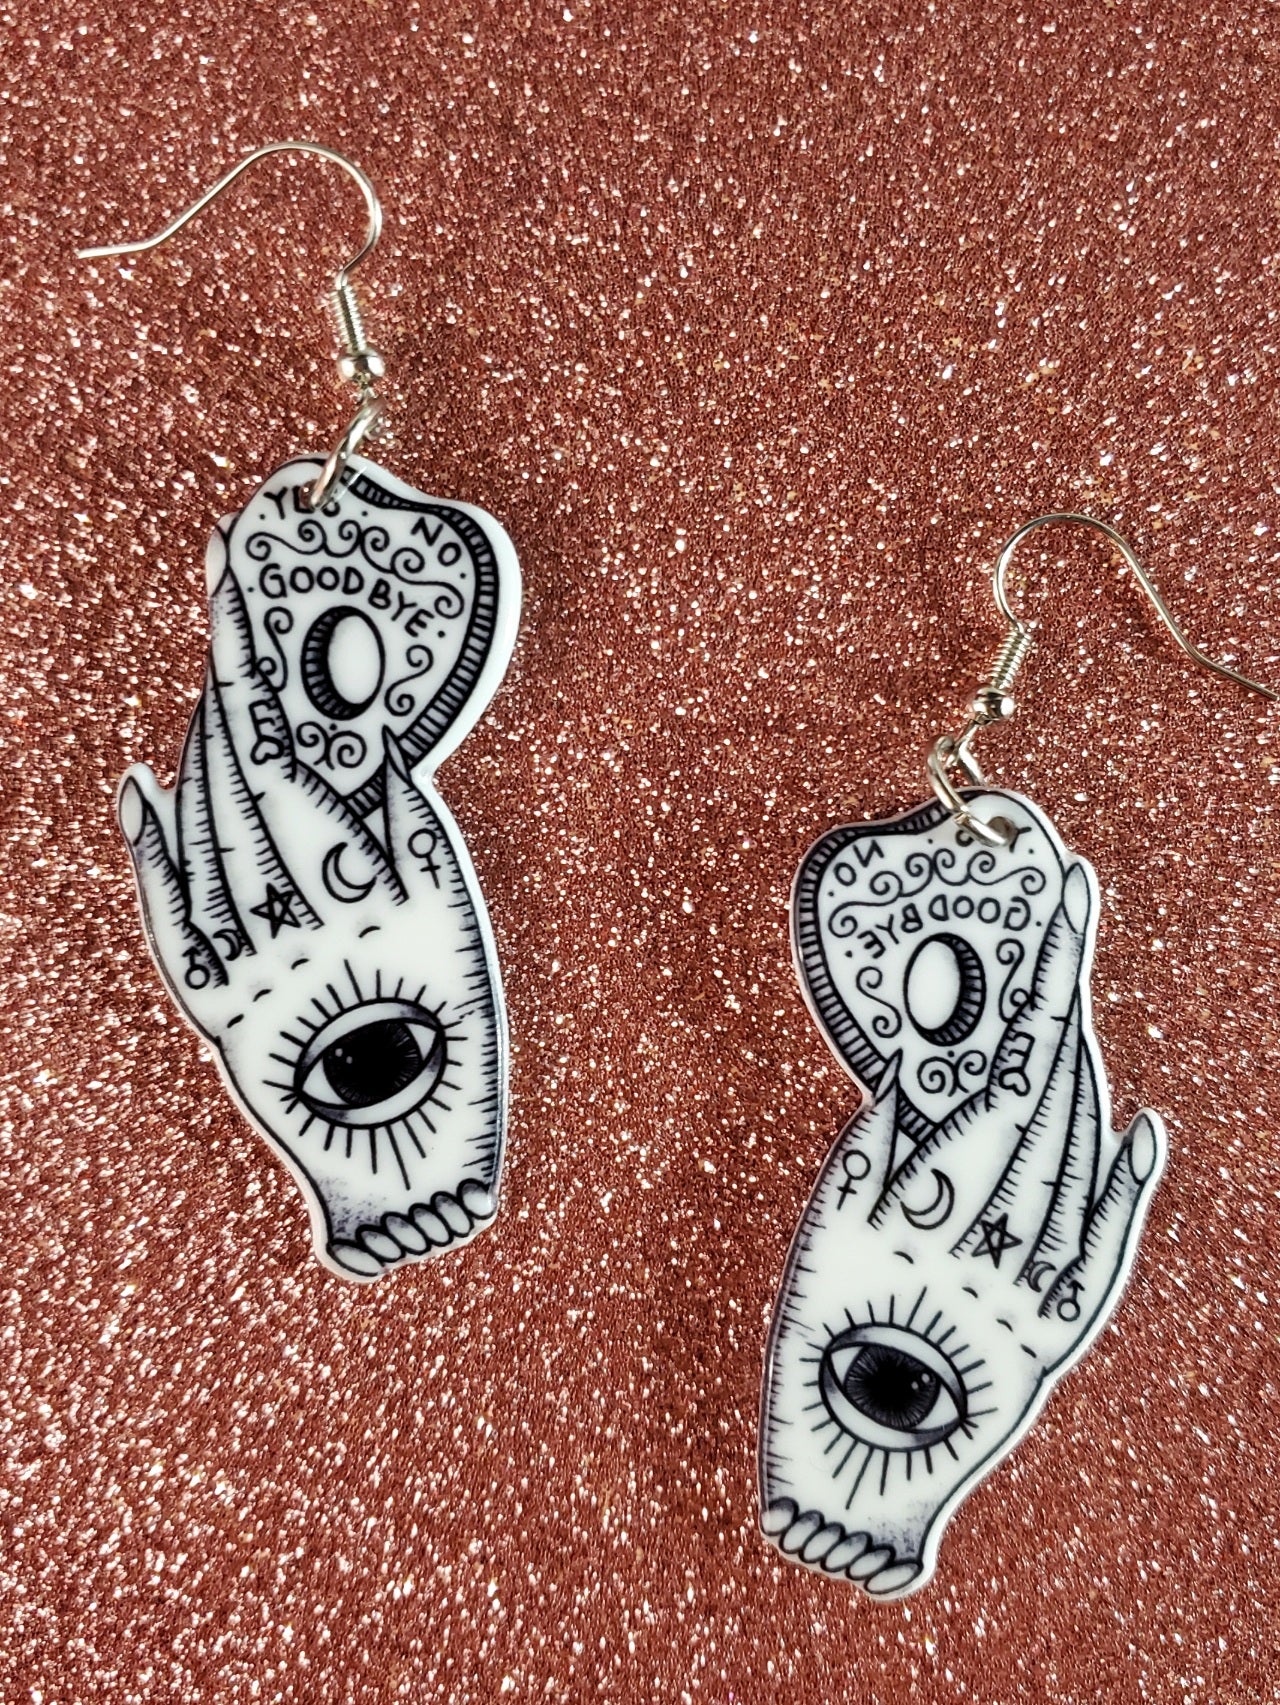 A pair of white acrylic coated earrings with an image of a hand covered in occult symbols with a large eye on its palm holding a ouija board planchette